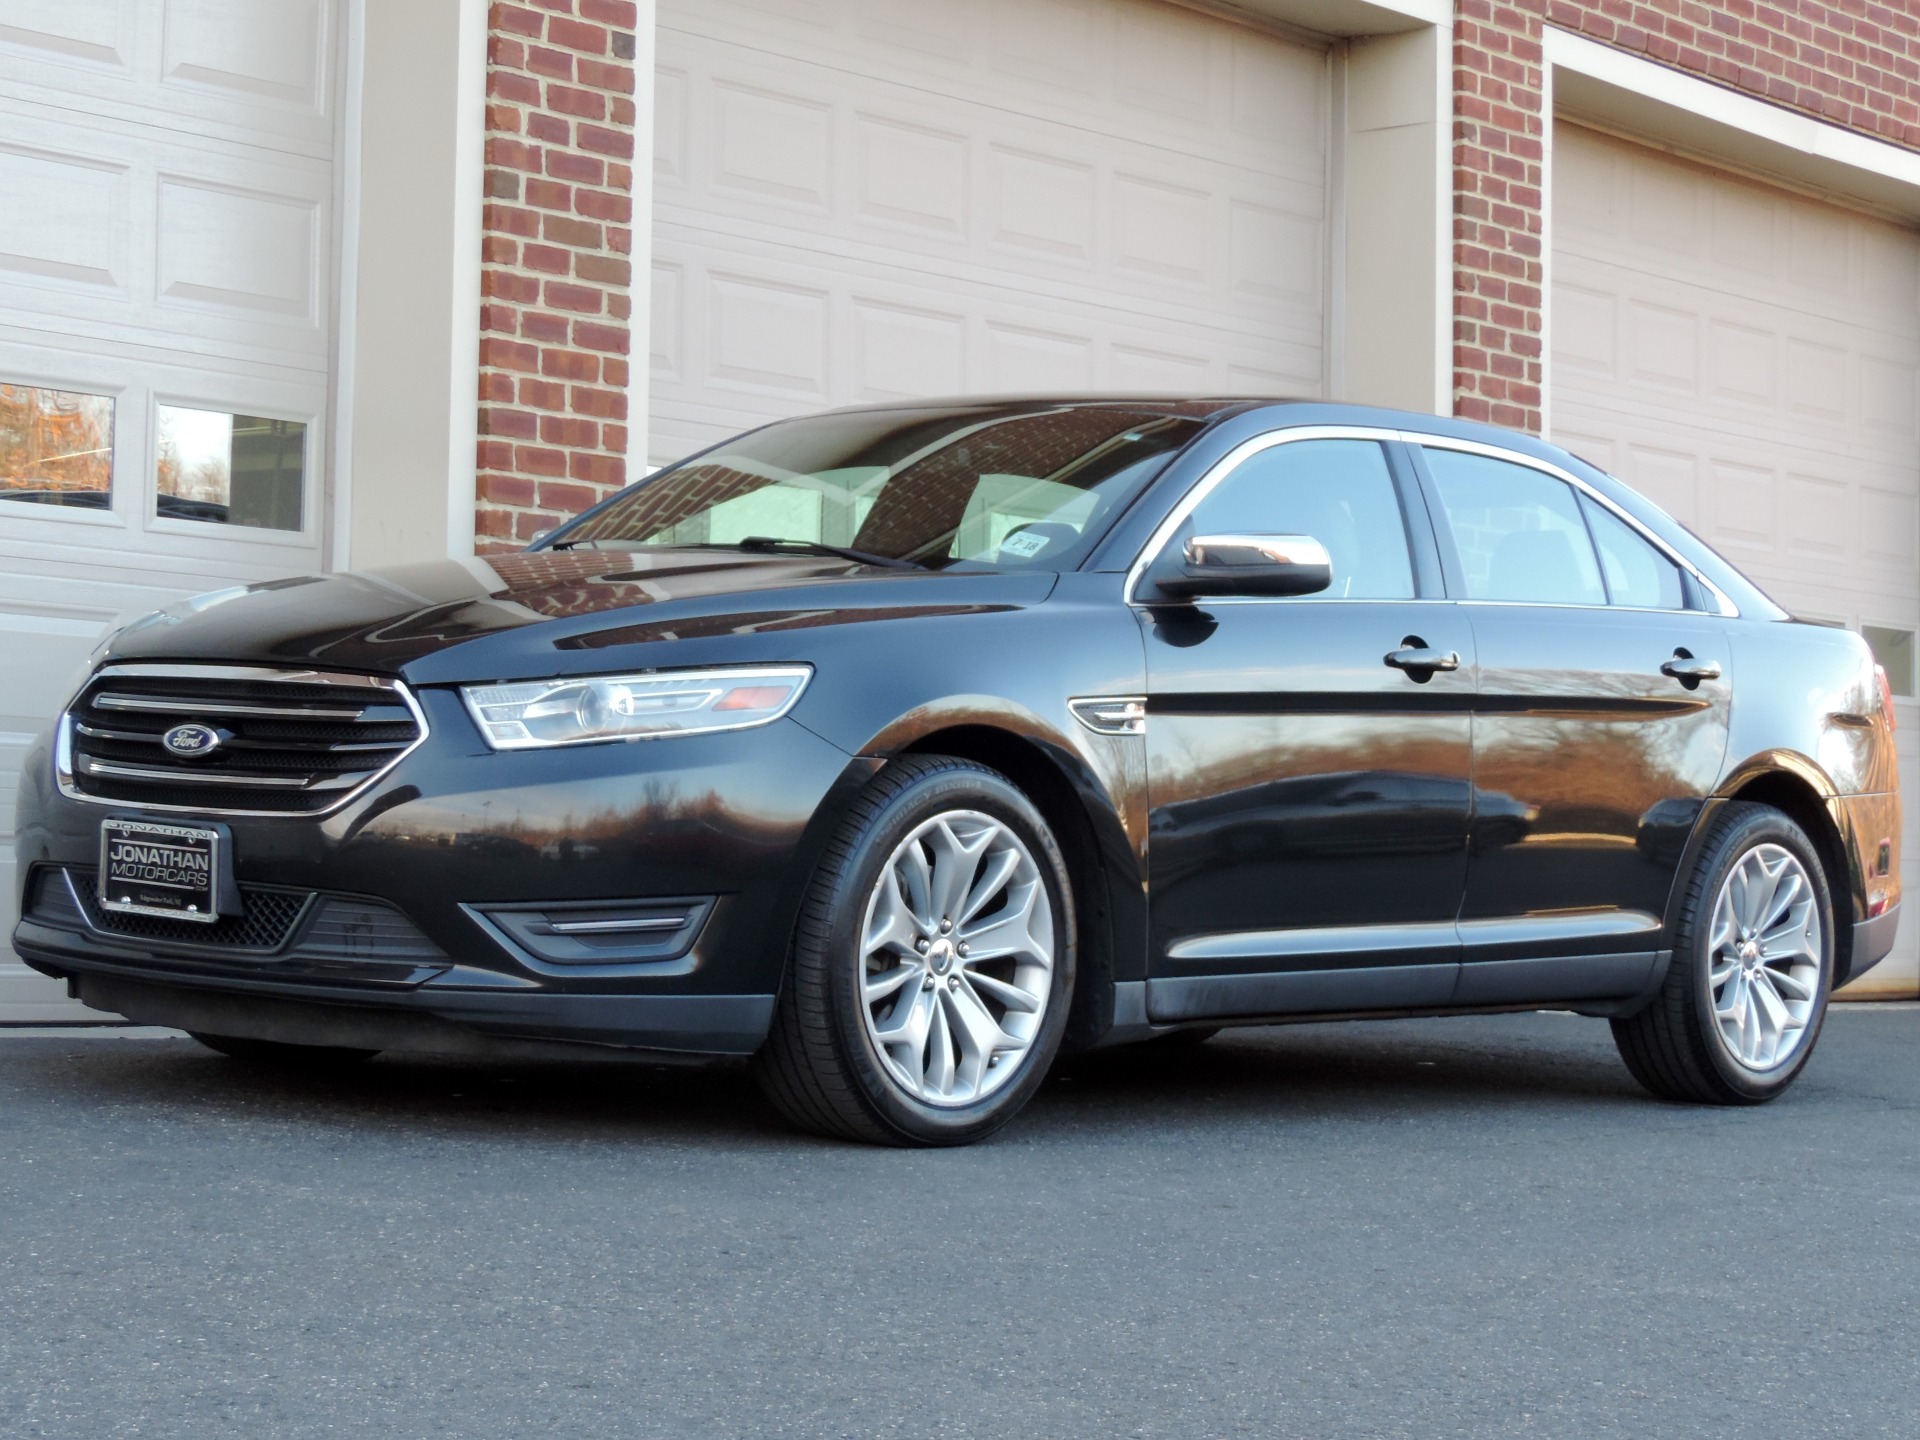 2013 Ford Taurus Limited Stock 121917 For Sale Near Edgewater Park